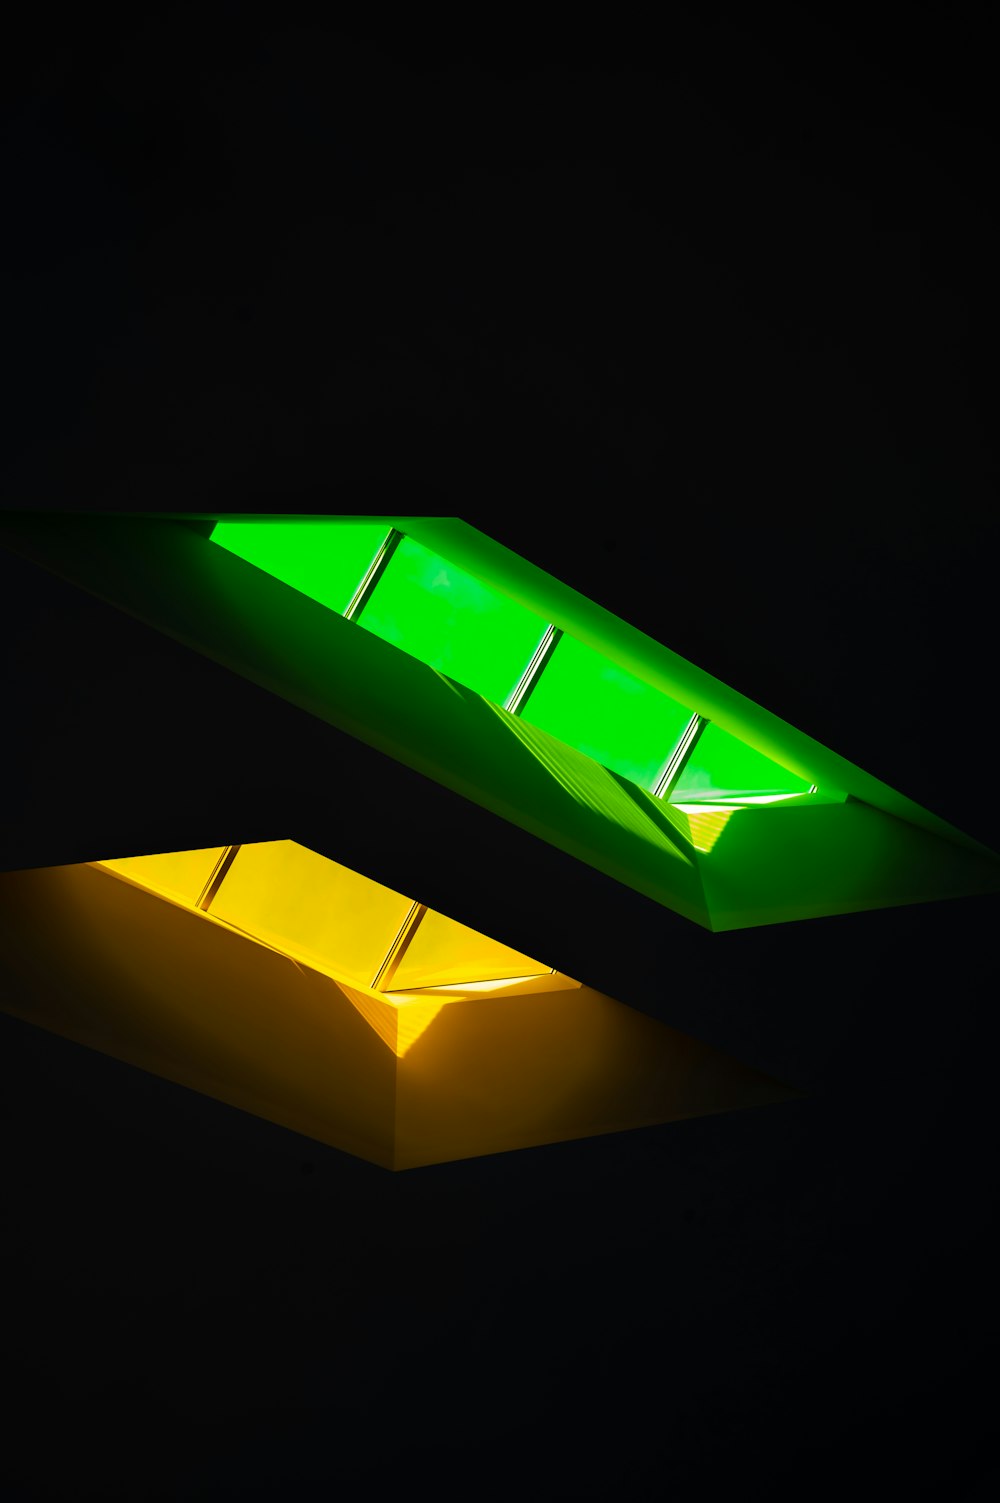 yellow and green light fixture